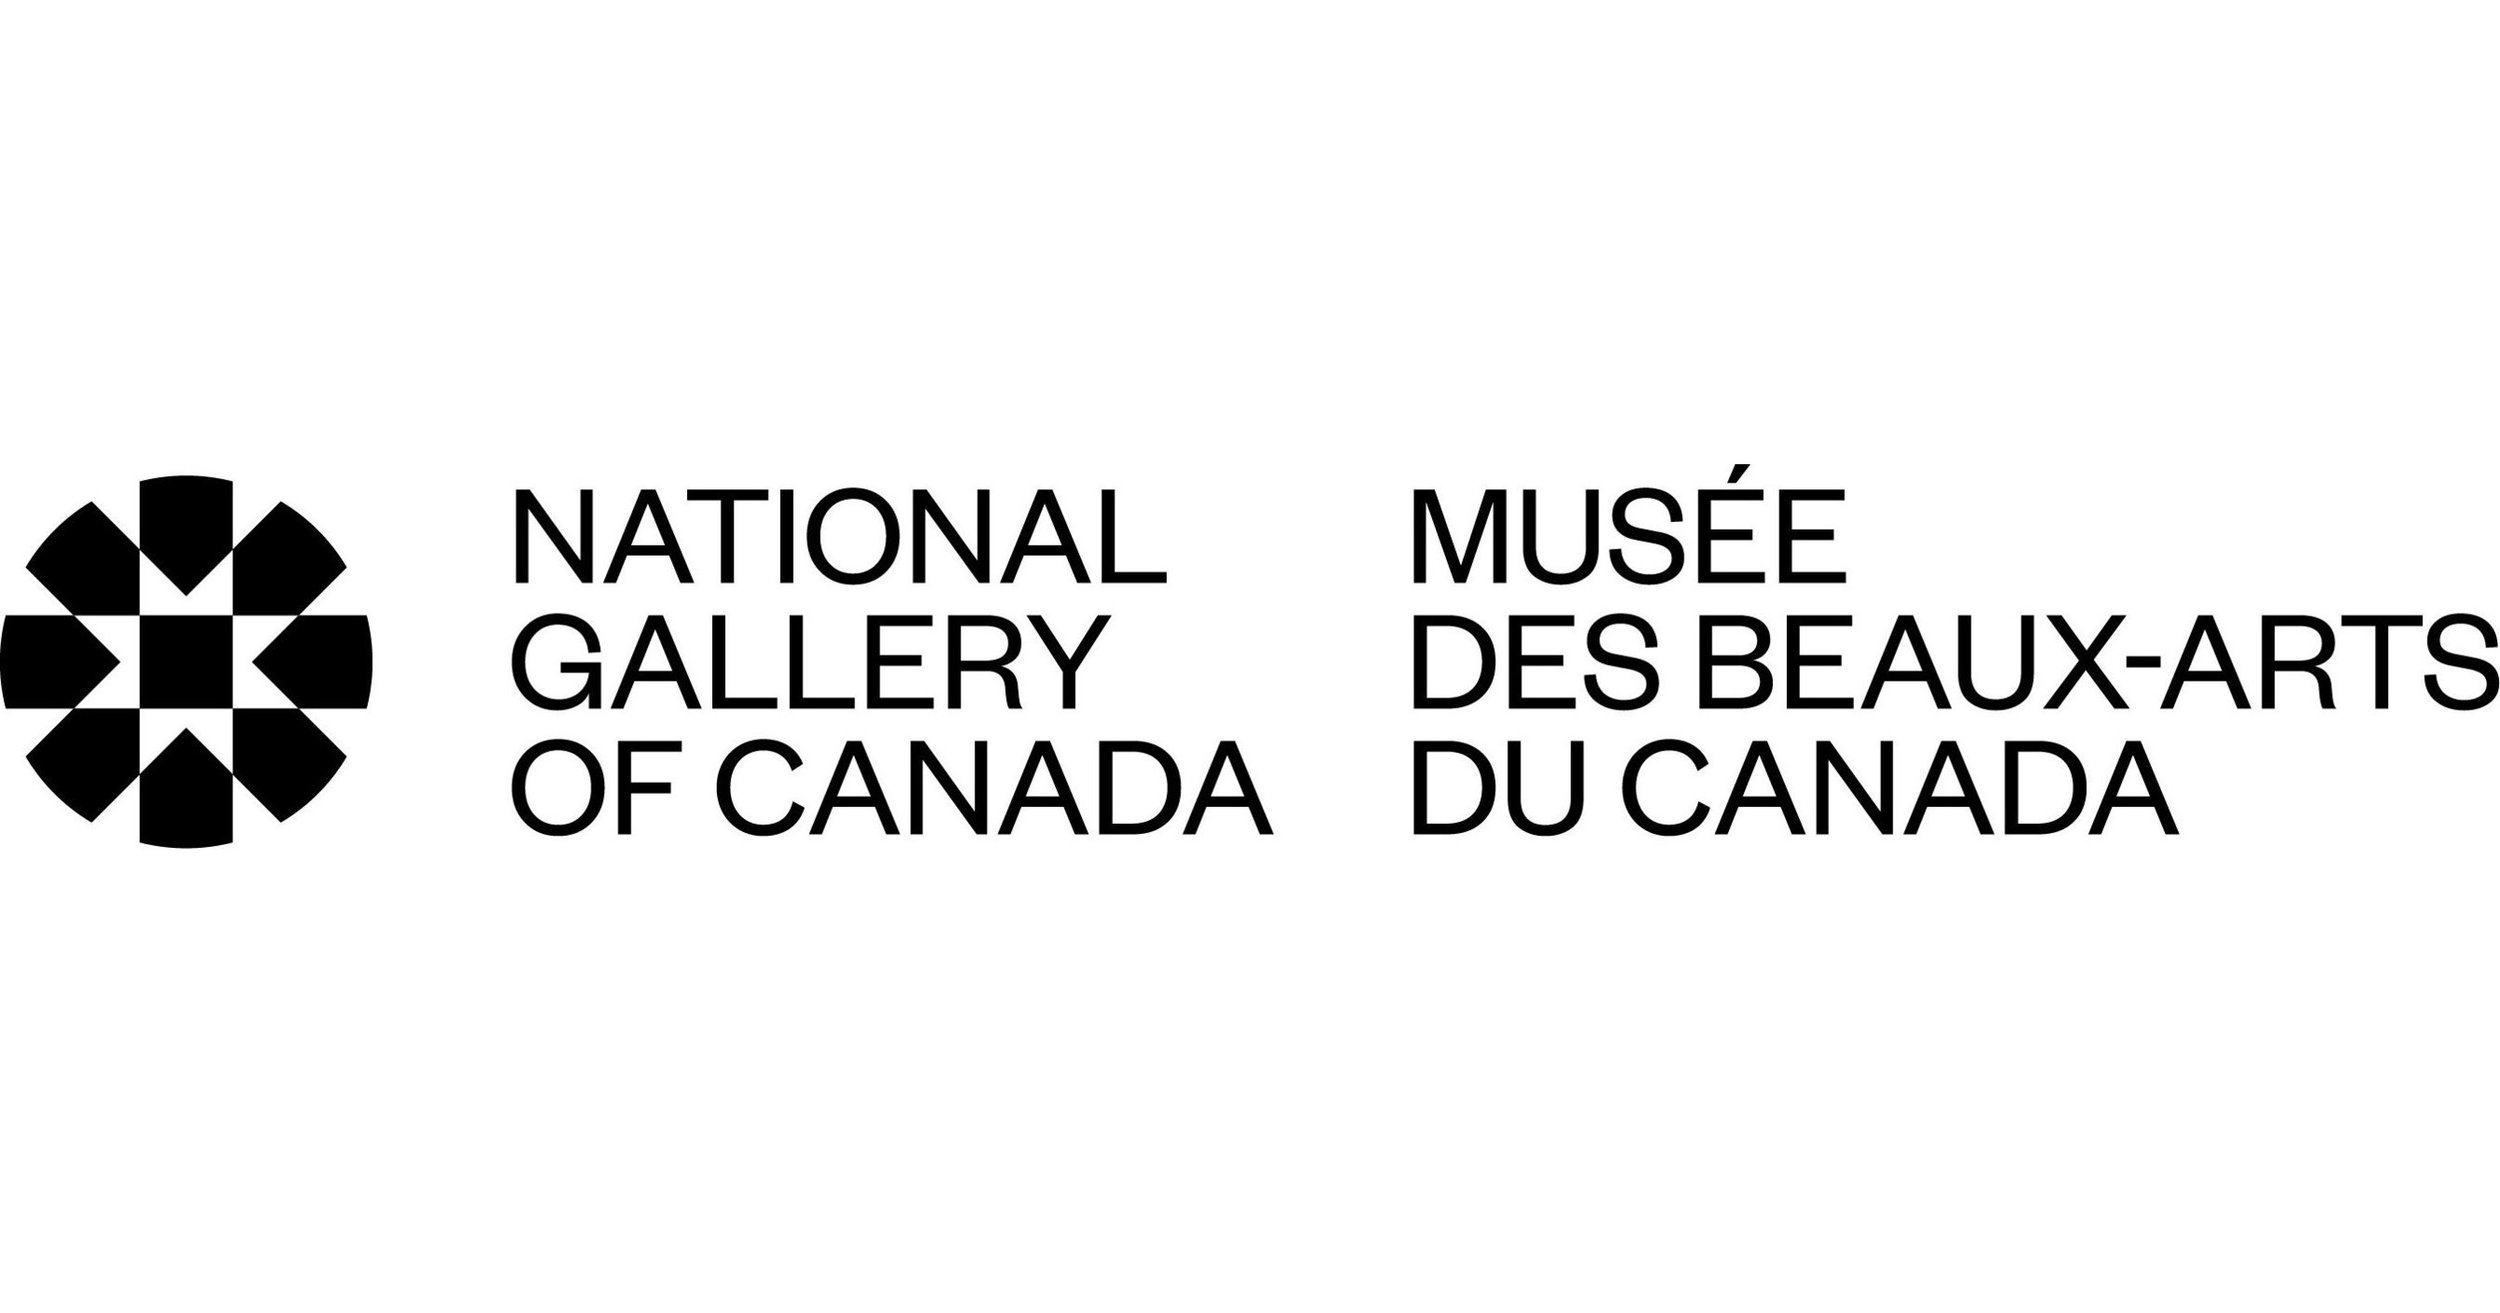 National_Gallery_of_Canada_National_Gallery_of_Canada_unveils_ne.jpg